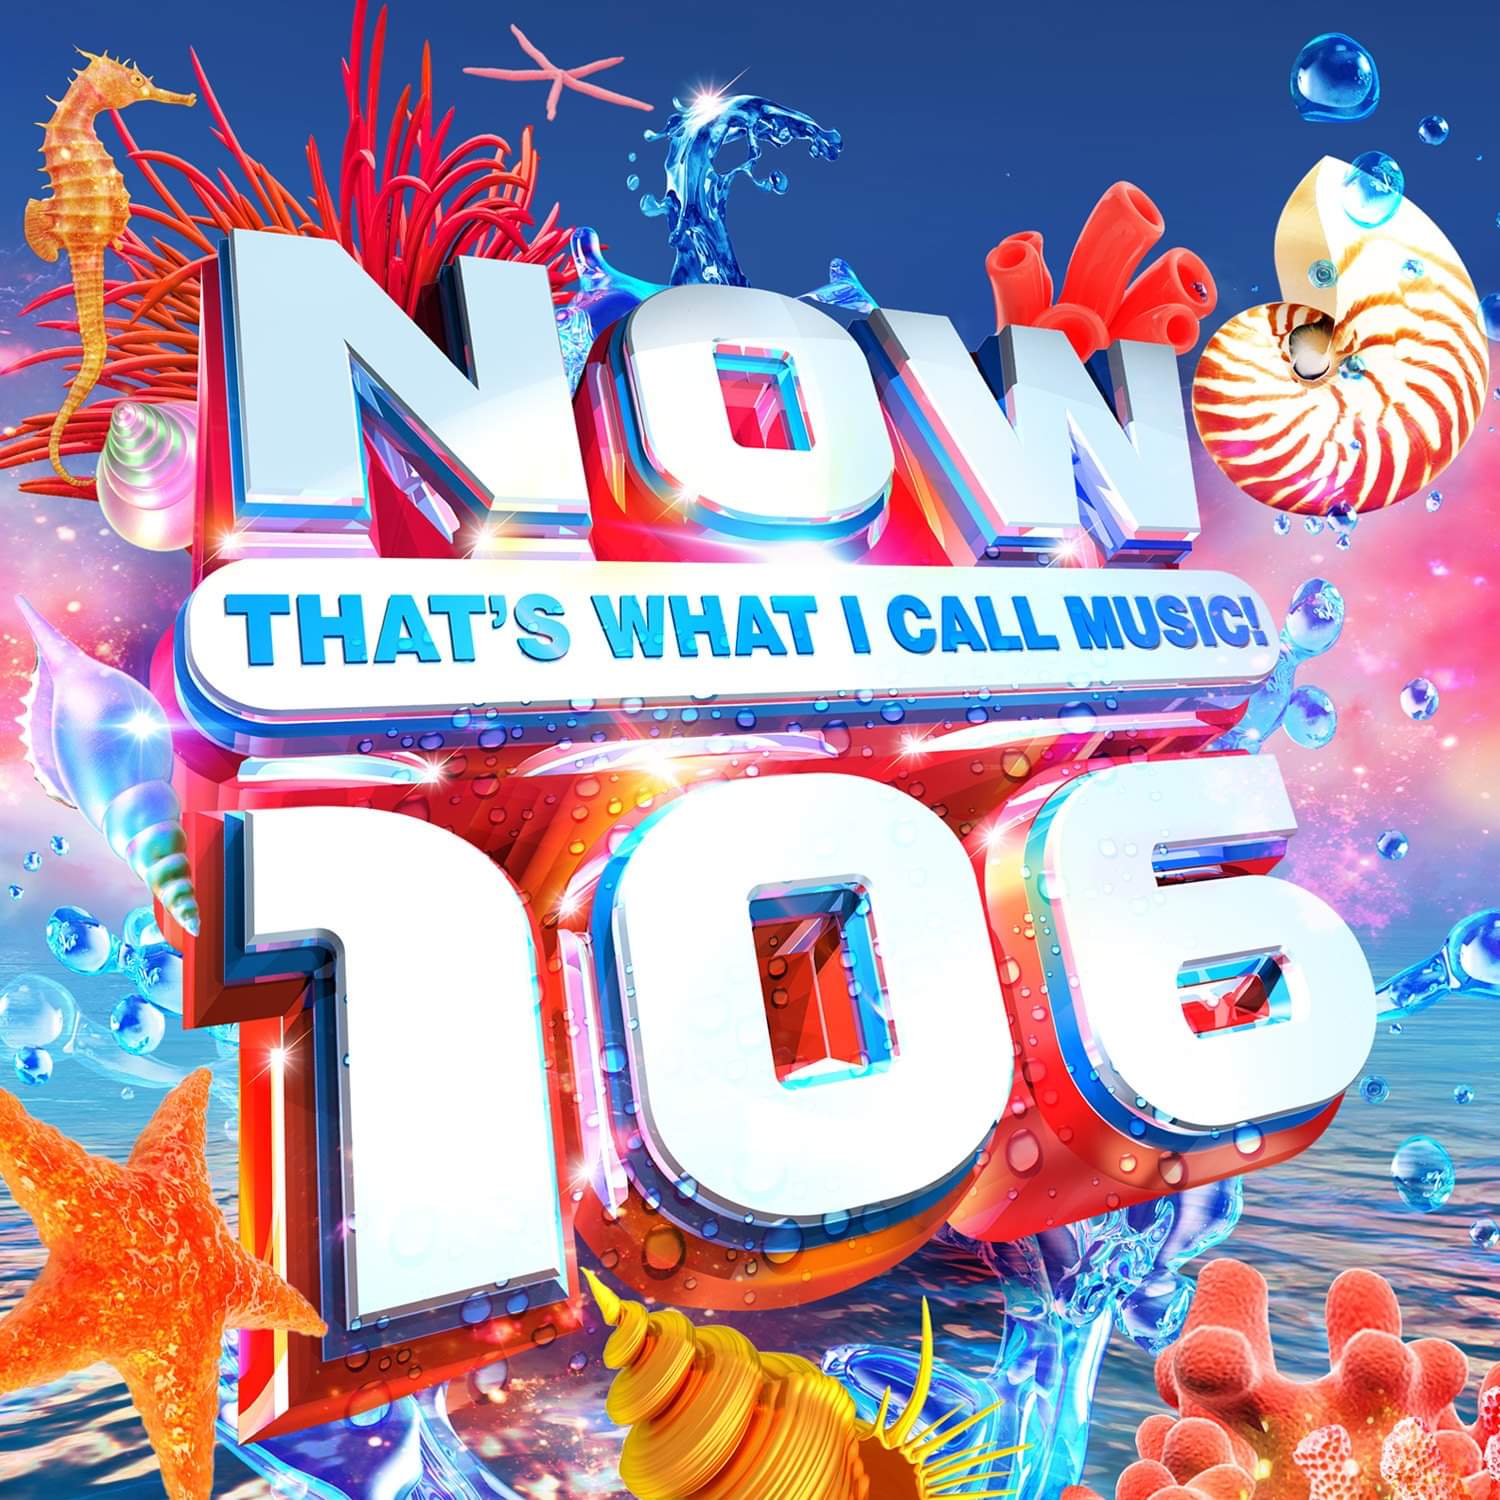 uk now thats what i call music 100